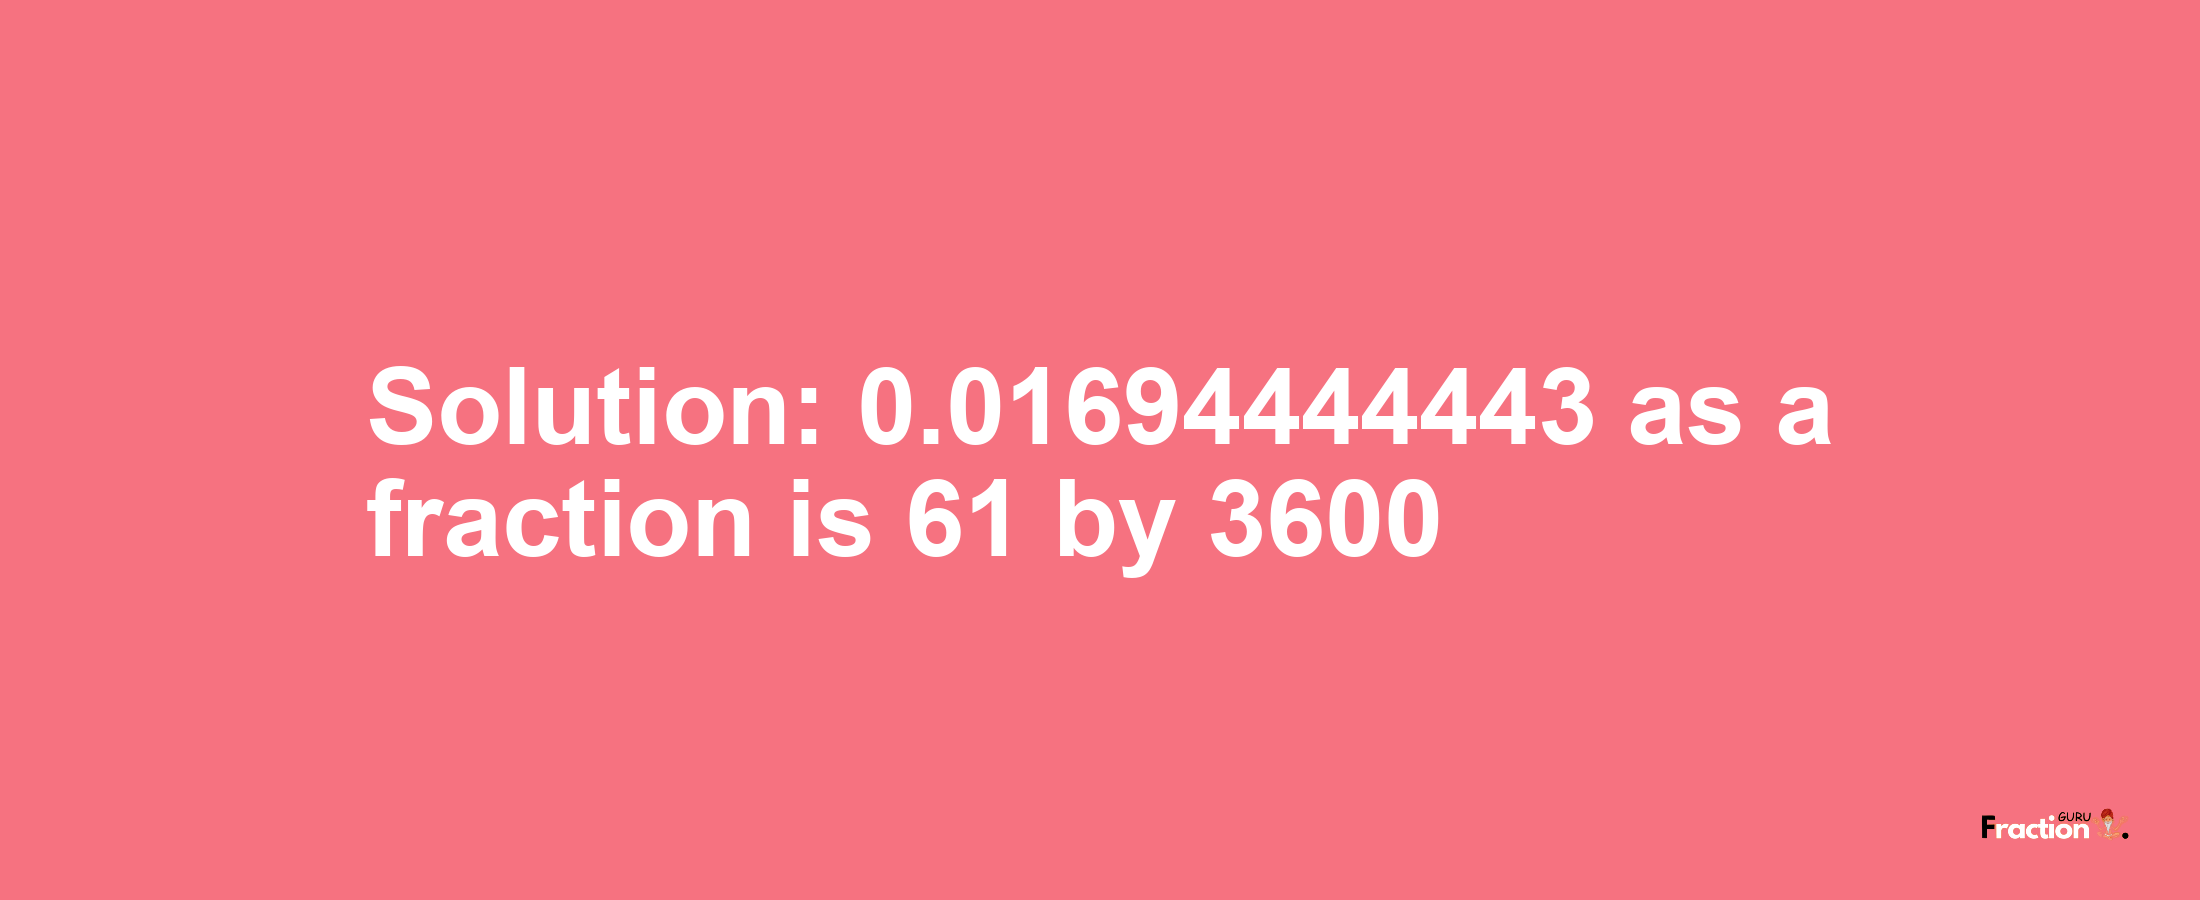 Solution:0.01694444443 as a fraction is 61/3600